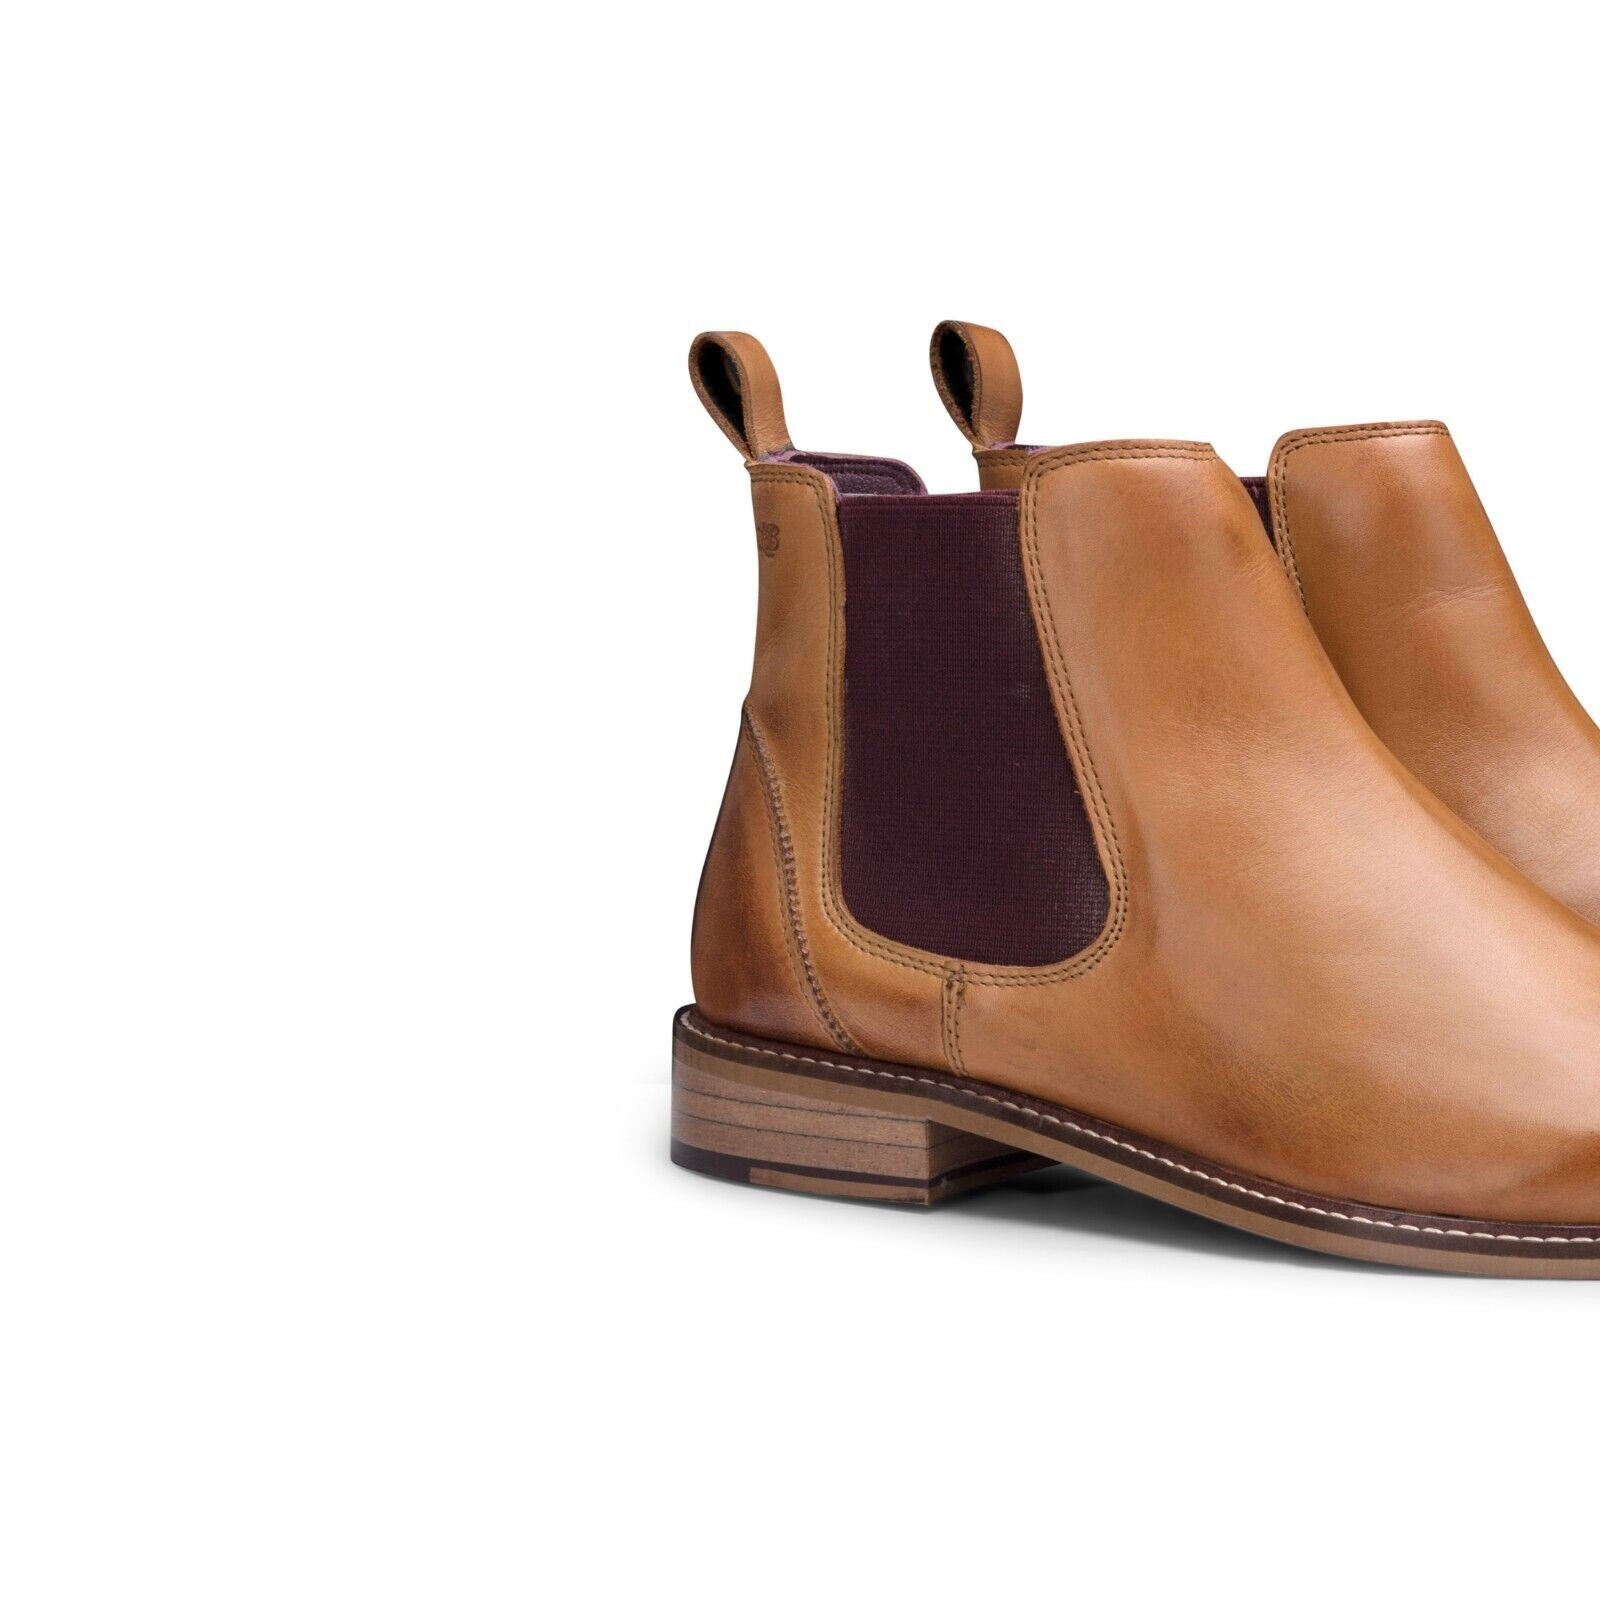 Mens Tan Leather Classic Chelsea Boots